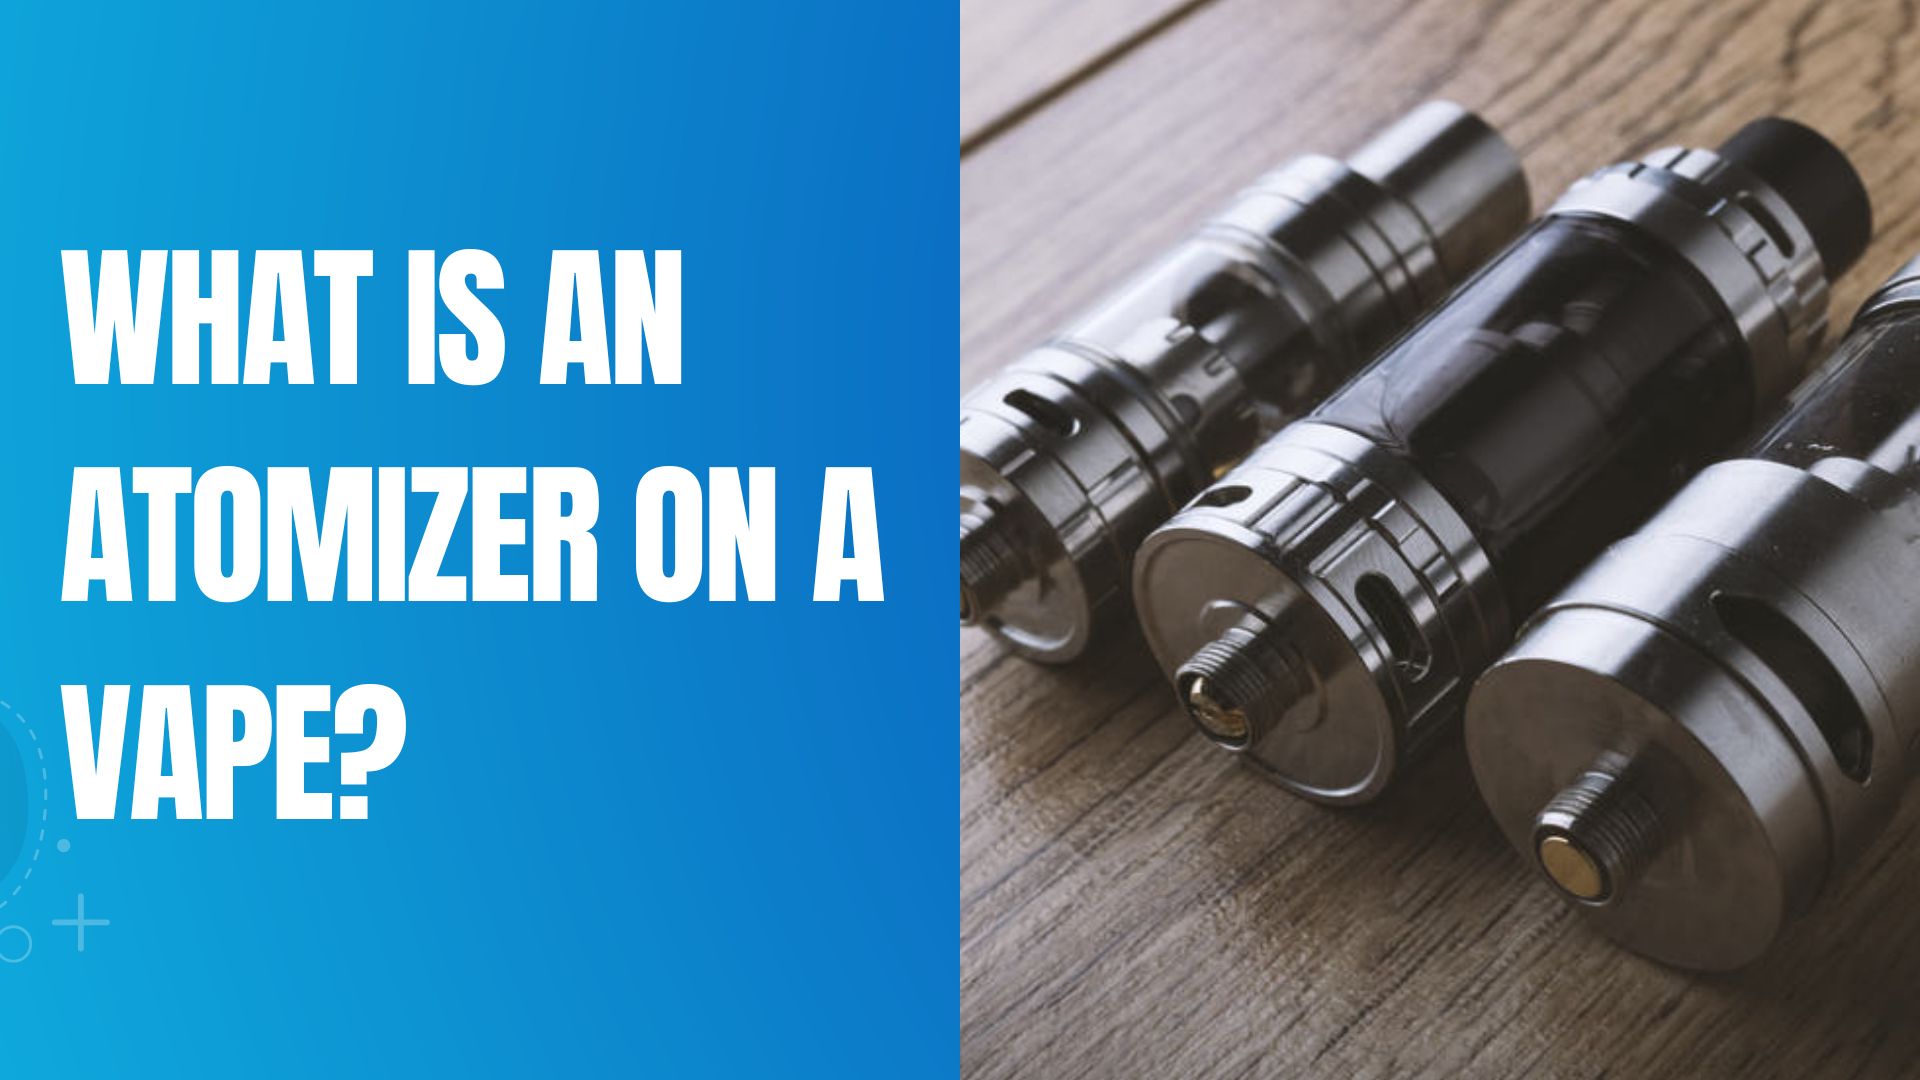 What Is an Atomizer On a Vape